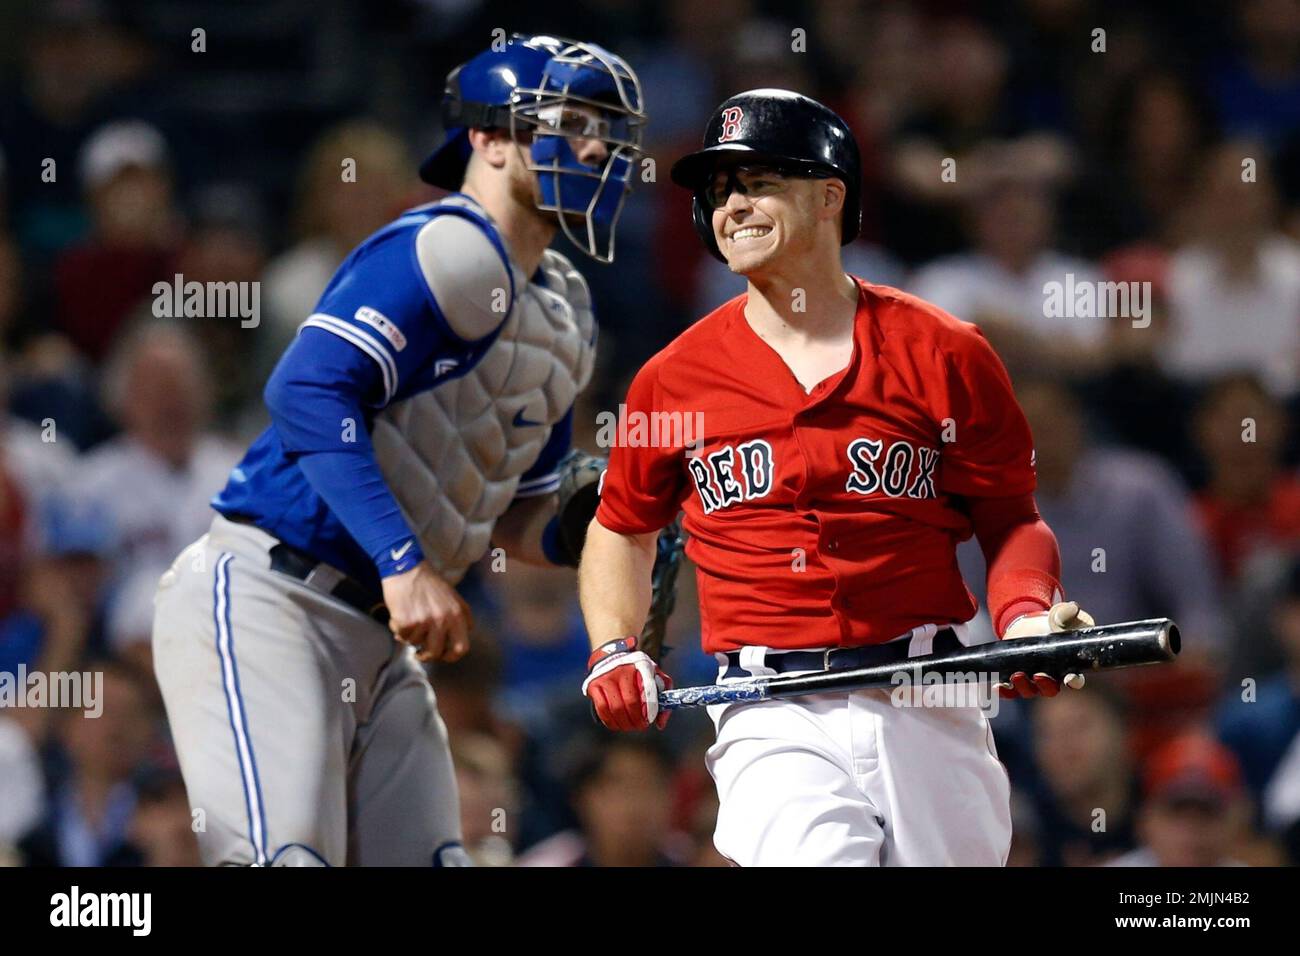 Boston Red Sox's Brock Holt, right, reacts beside Toronto Blue Jays' Danny  Jansen after striking out to end the ninth inning of a baseball game with  the score tied in Boston, Friday